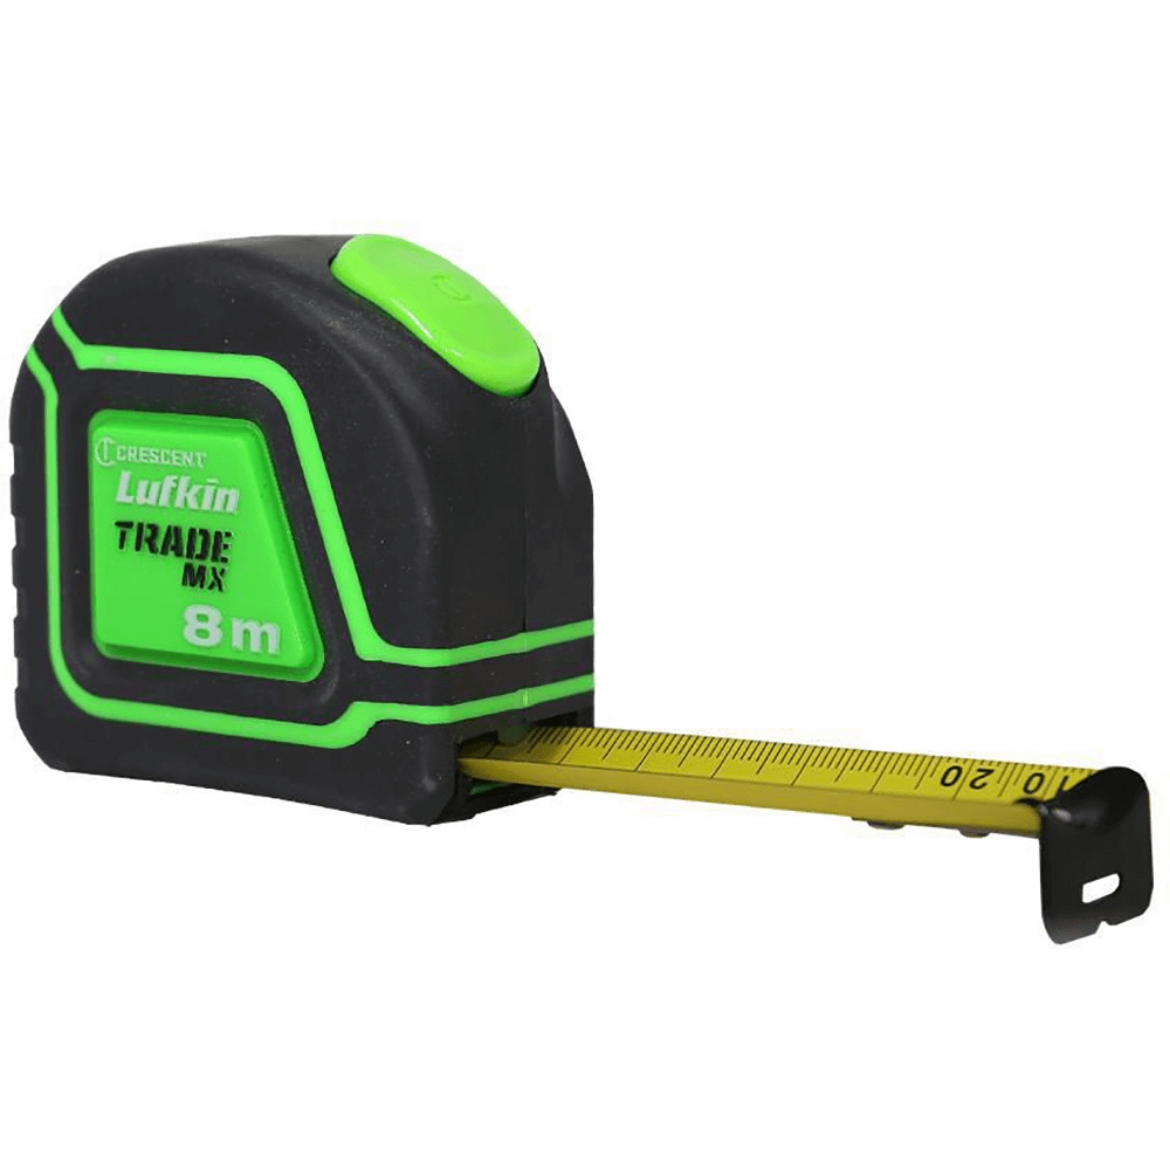 Picture of Tape Measure Trade MX 8m x 25mm